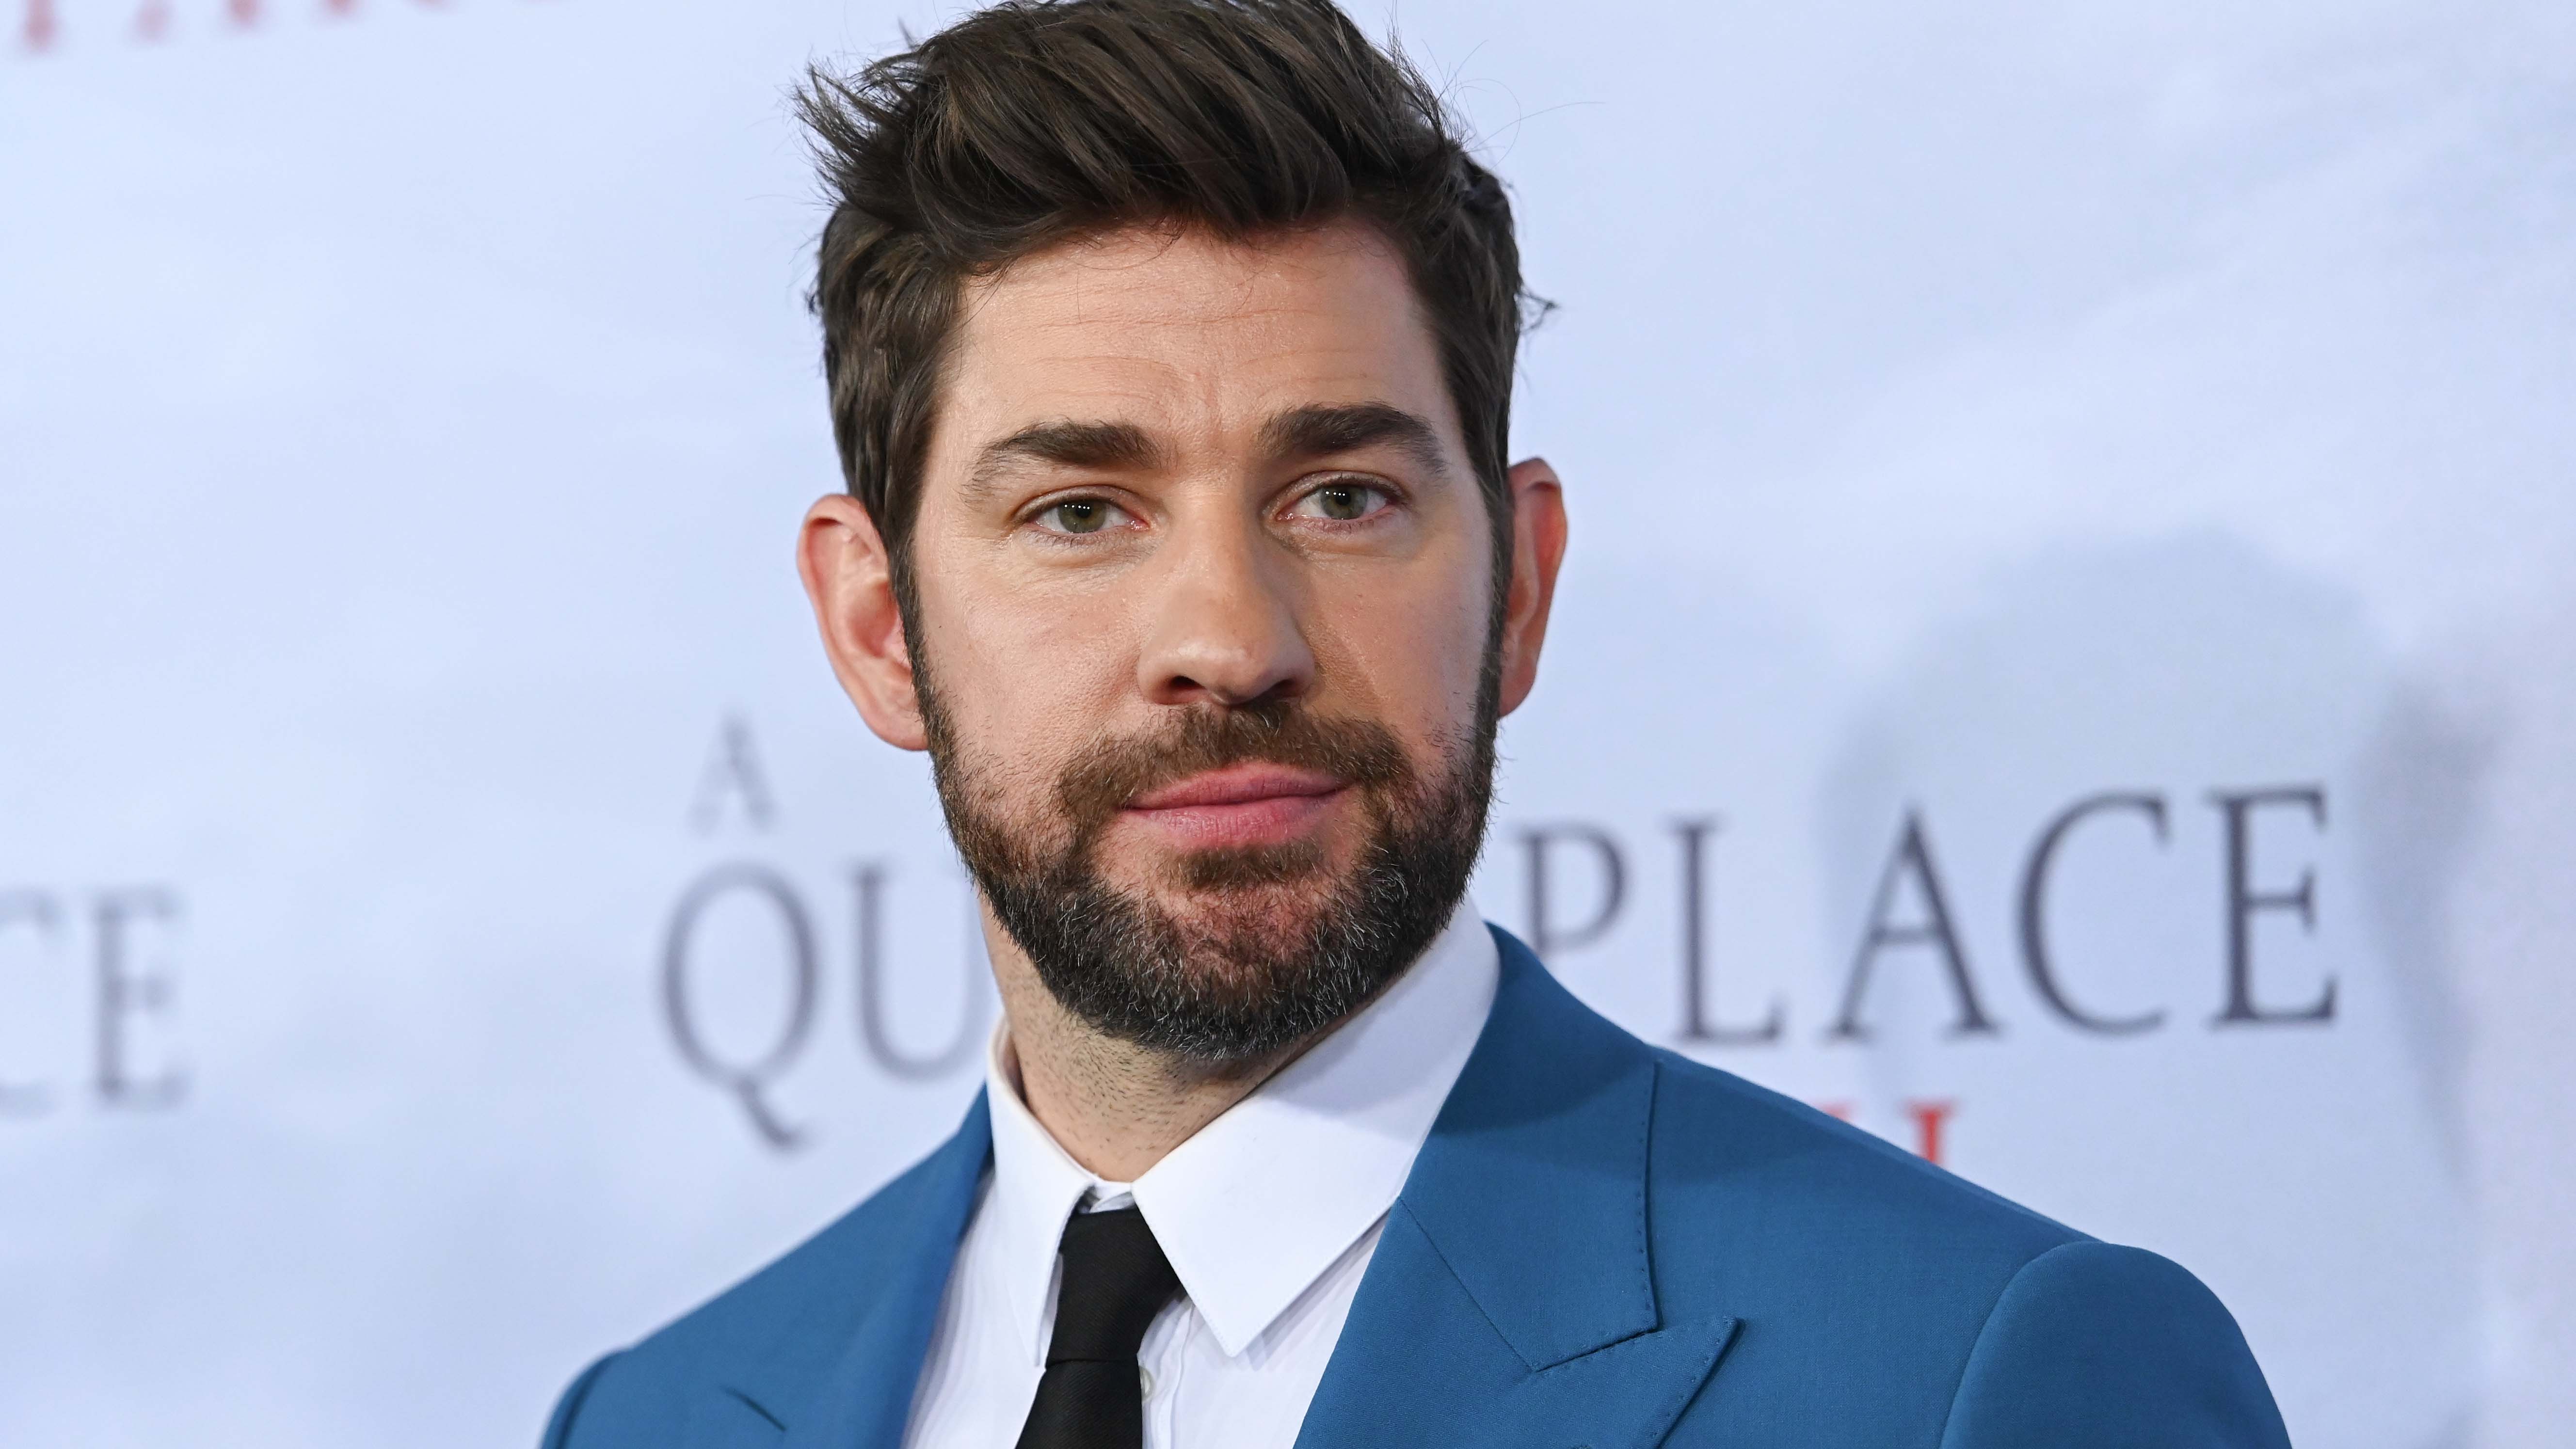 John Krasinski explains decision to sell 'Some Good News' after being called a 'sellout' by fans - Fox News